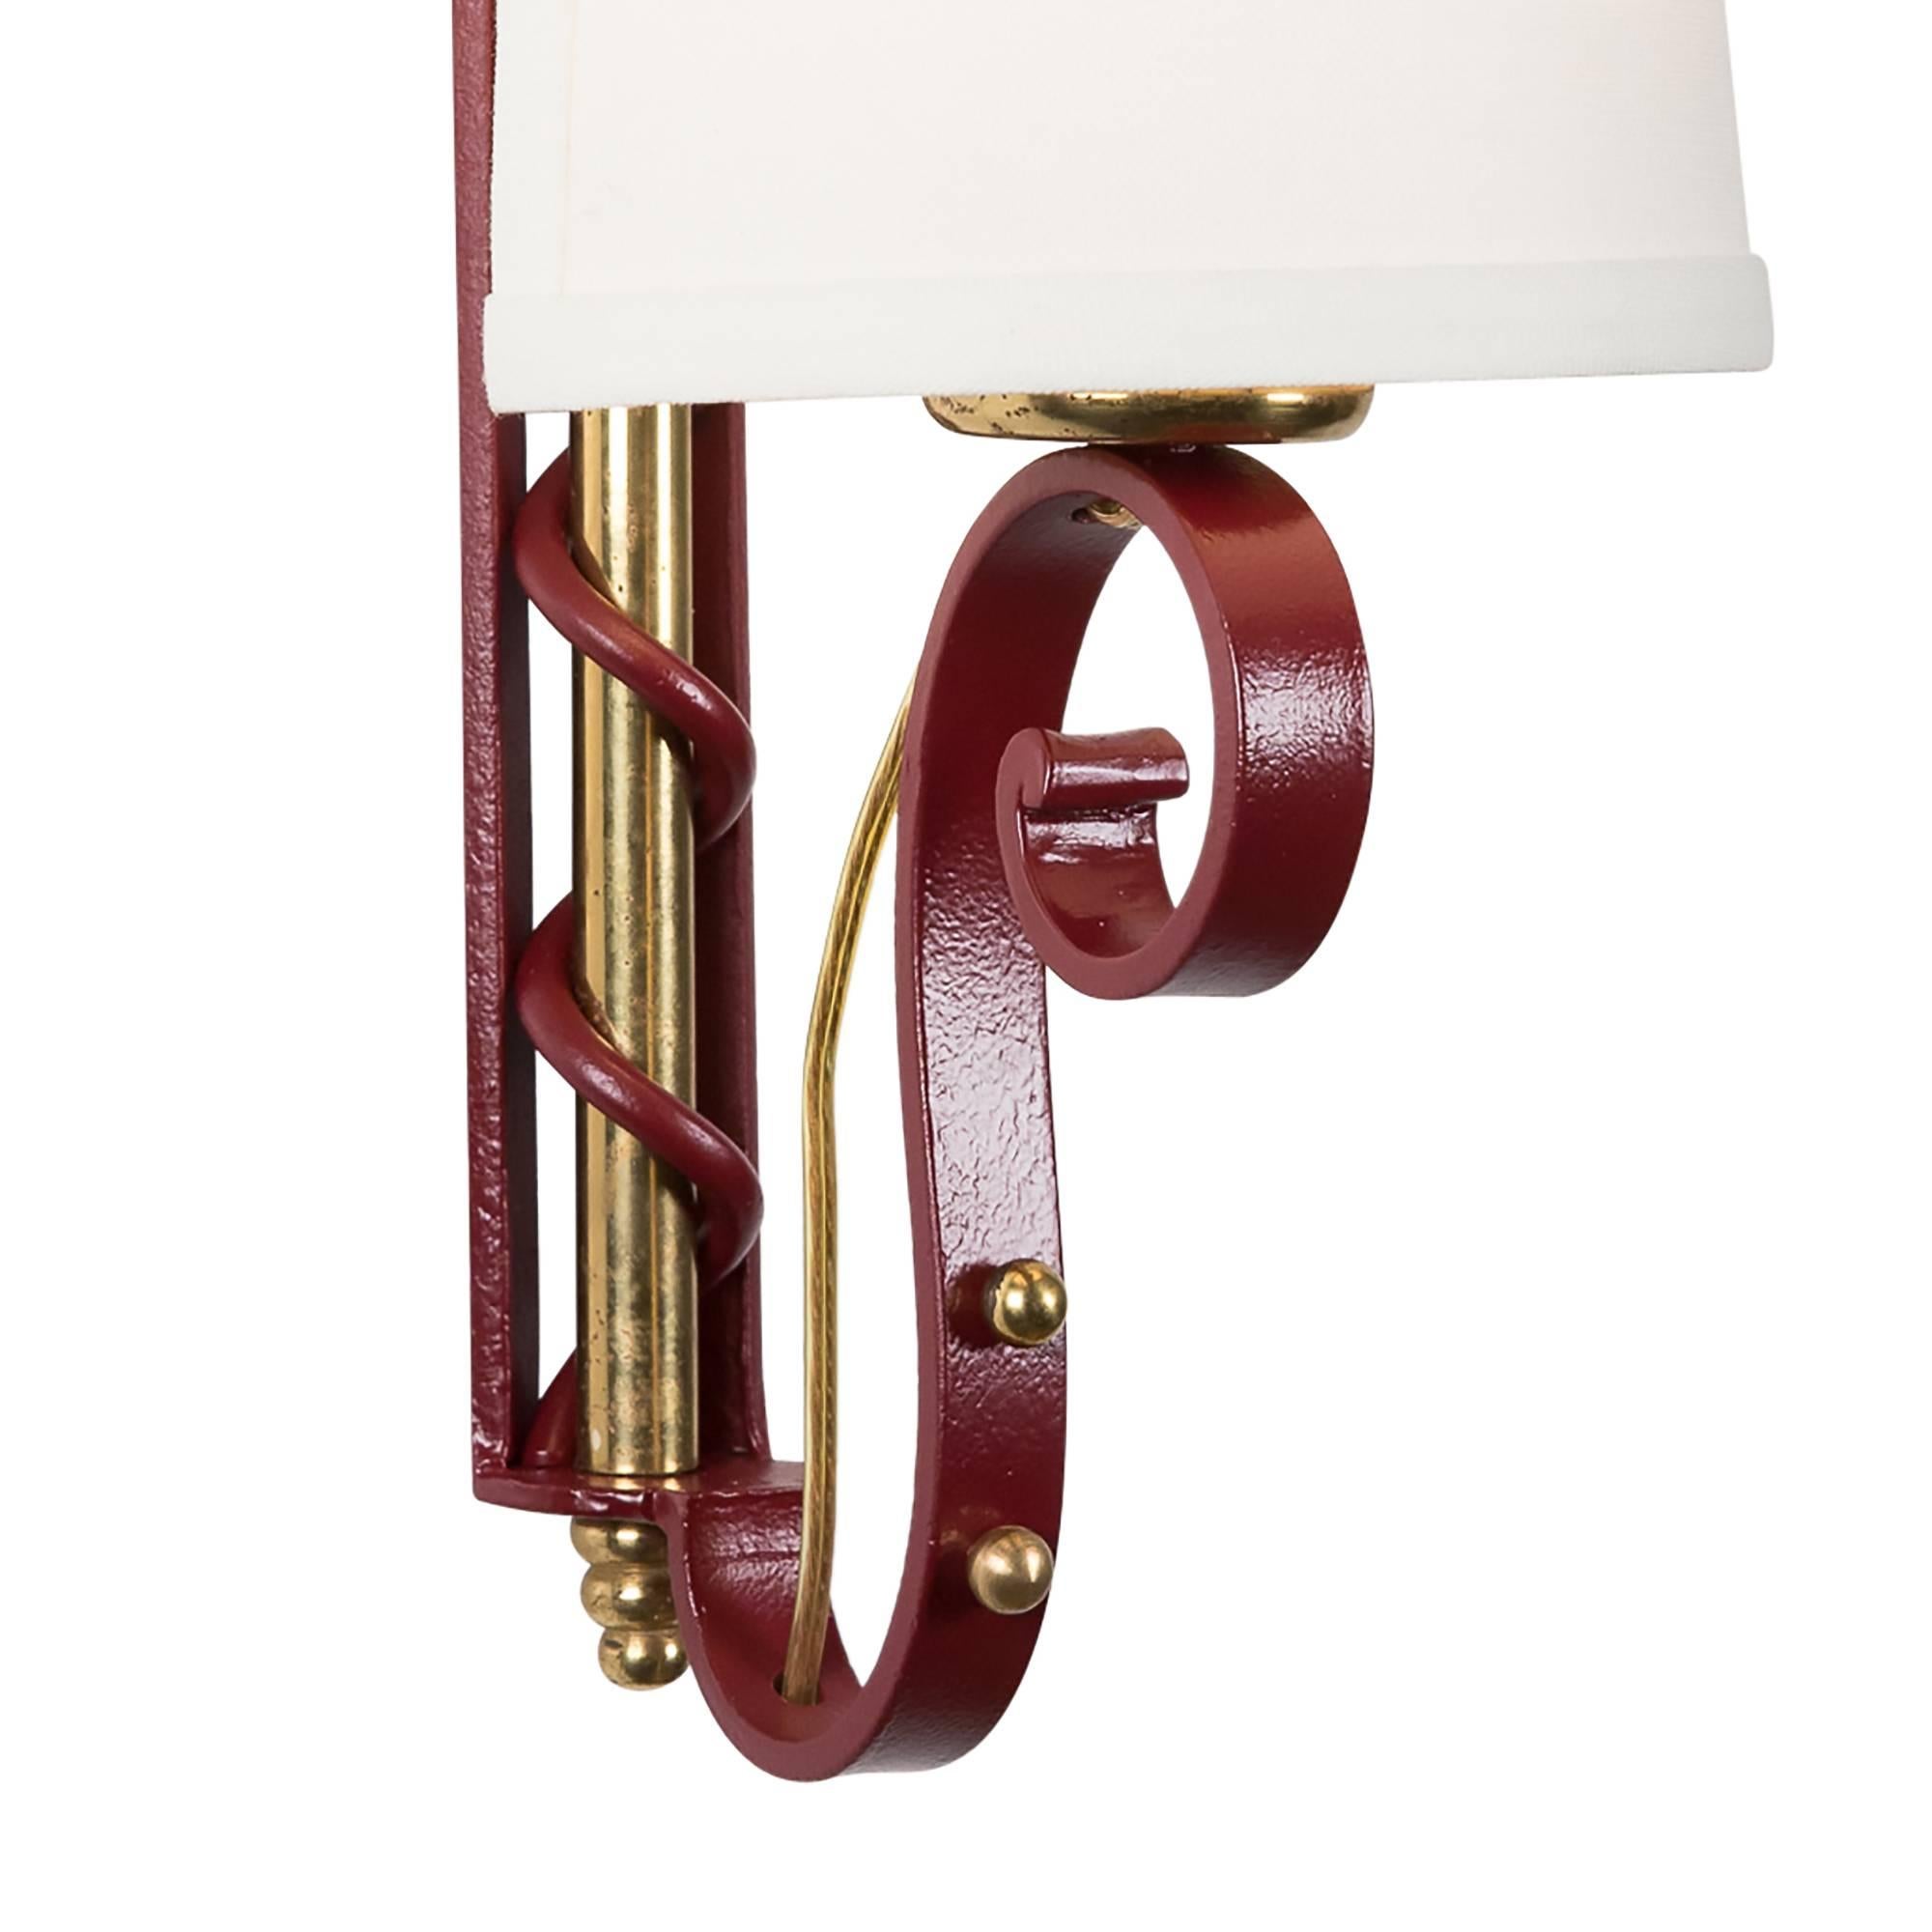 Mid-20th Century Pair of Red Lacquered Iron Sconces, French, 1950s For Sale